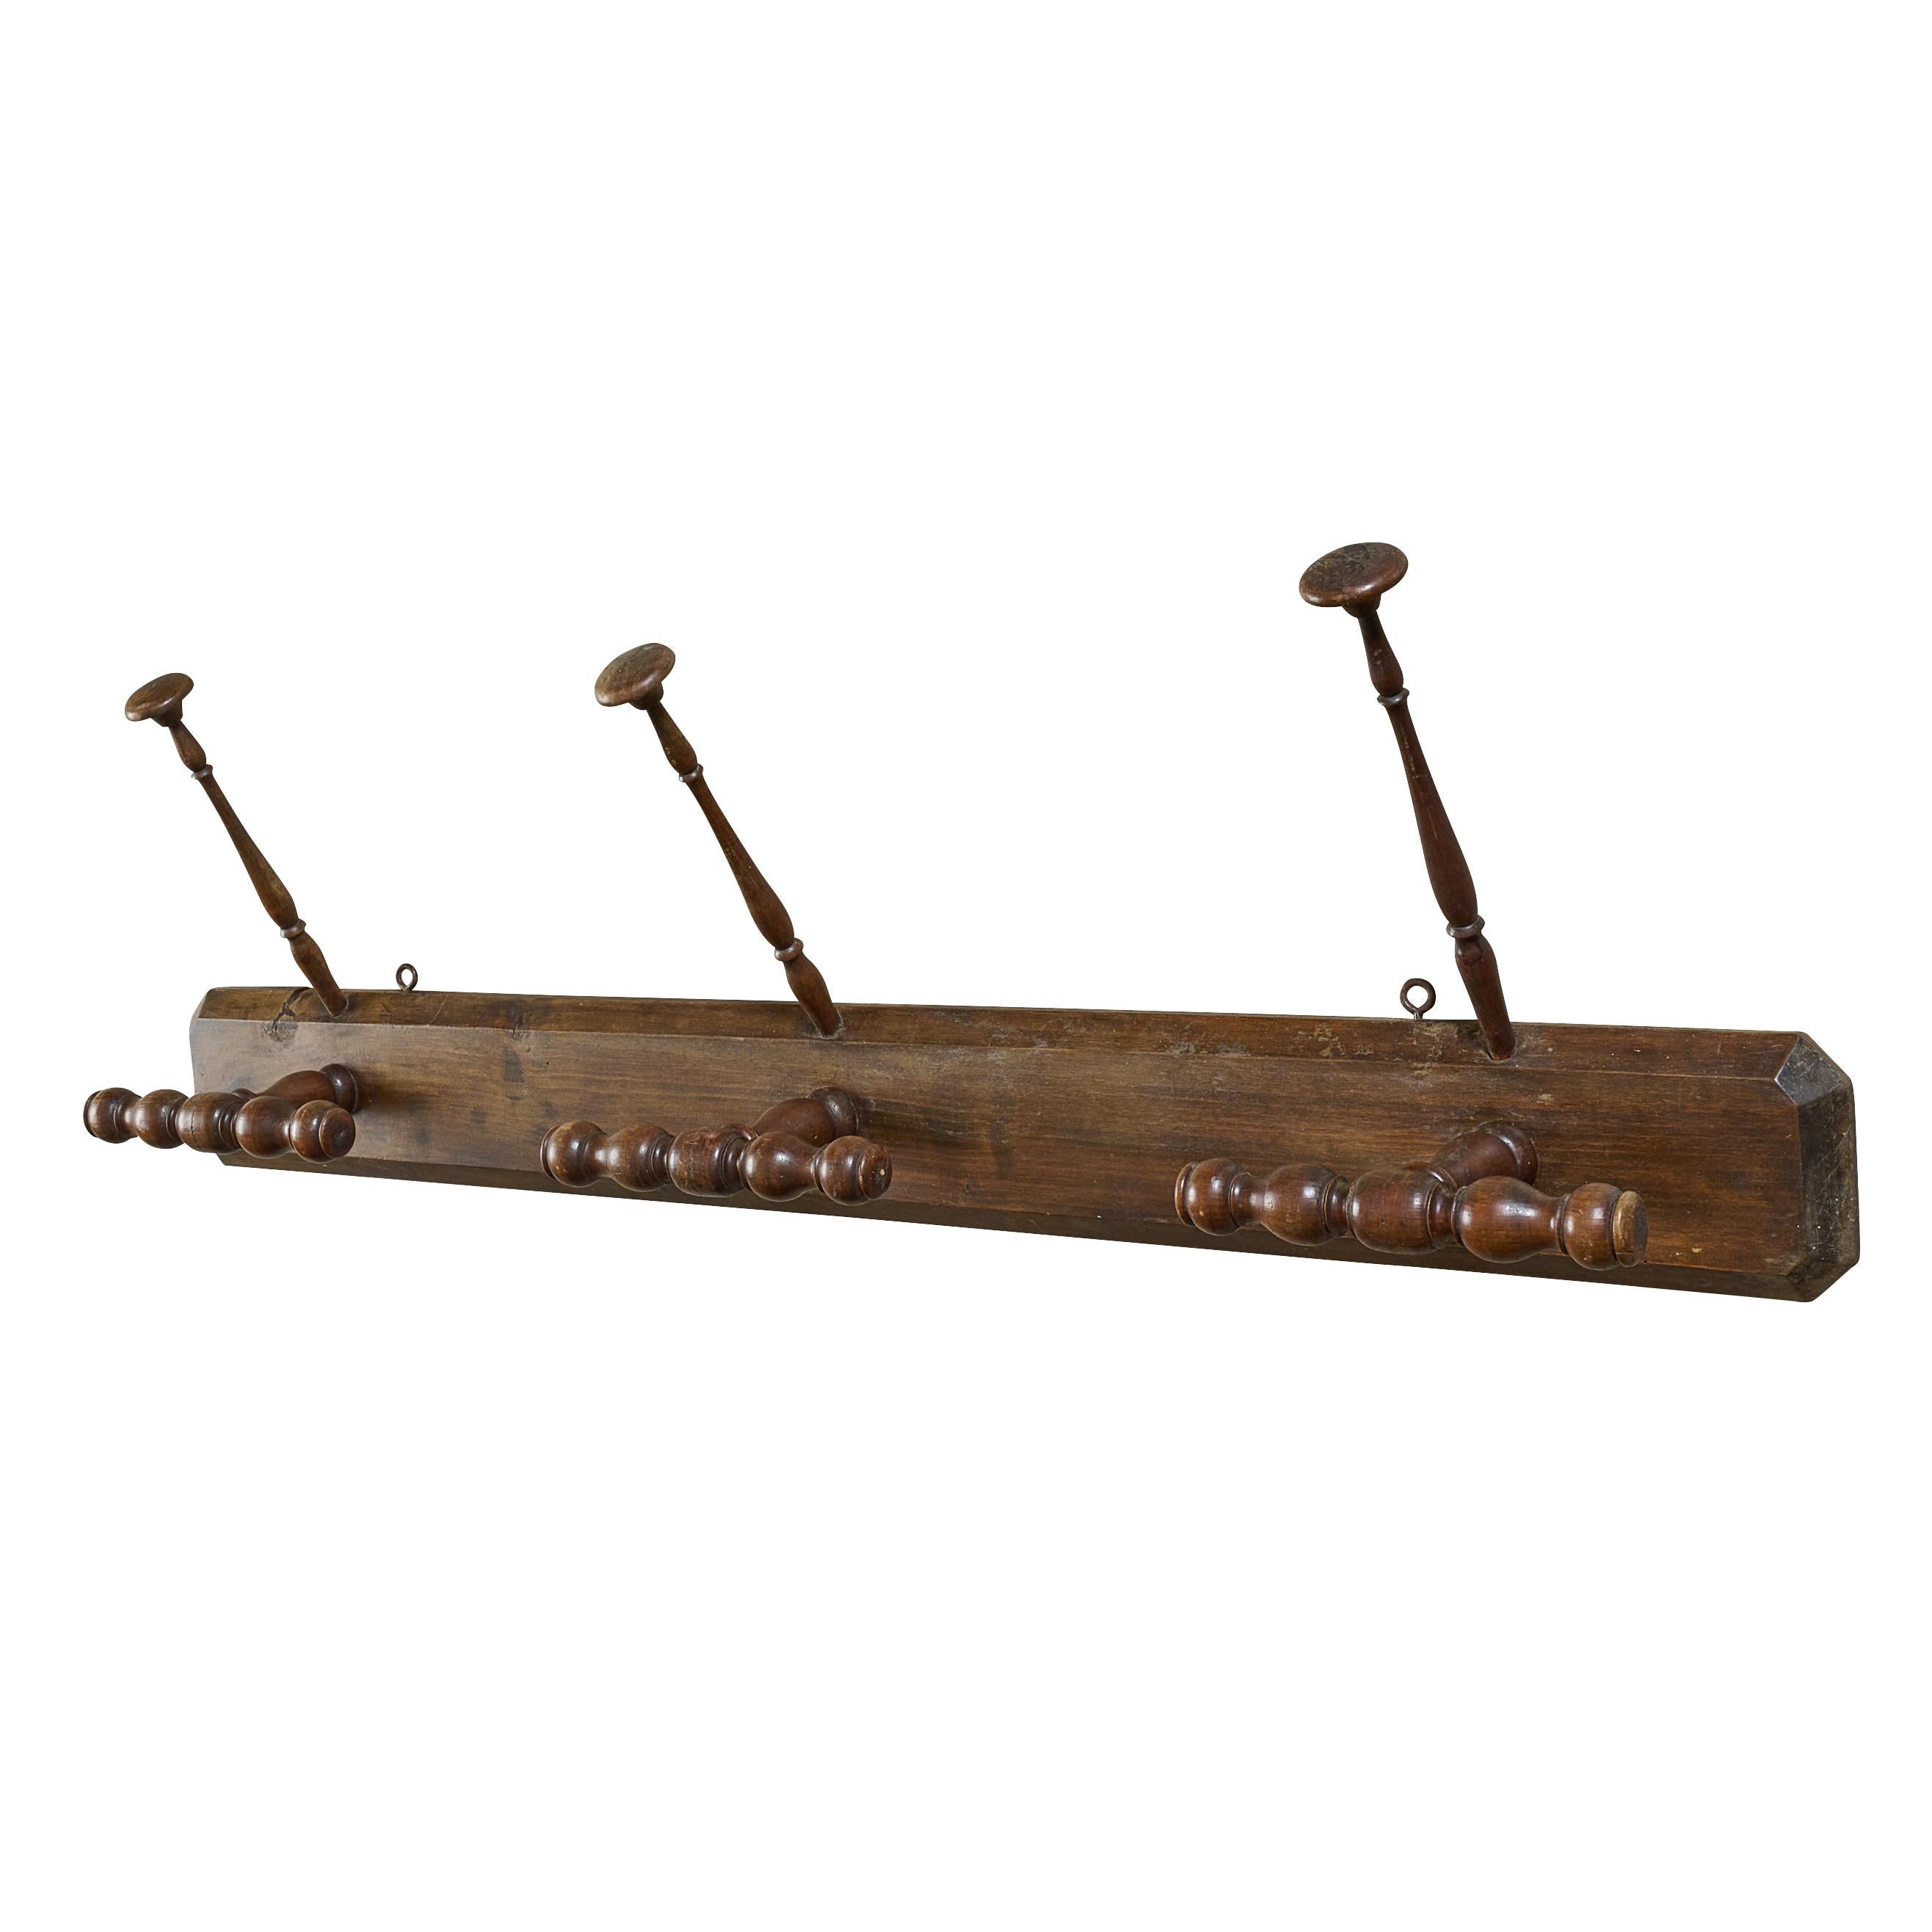 Wood six hook hat and coat rack. With great design and function.

